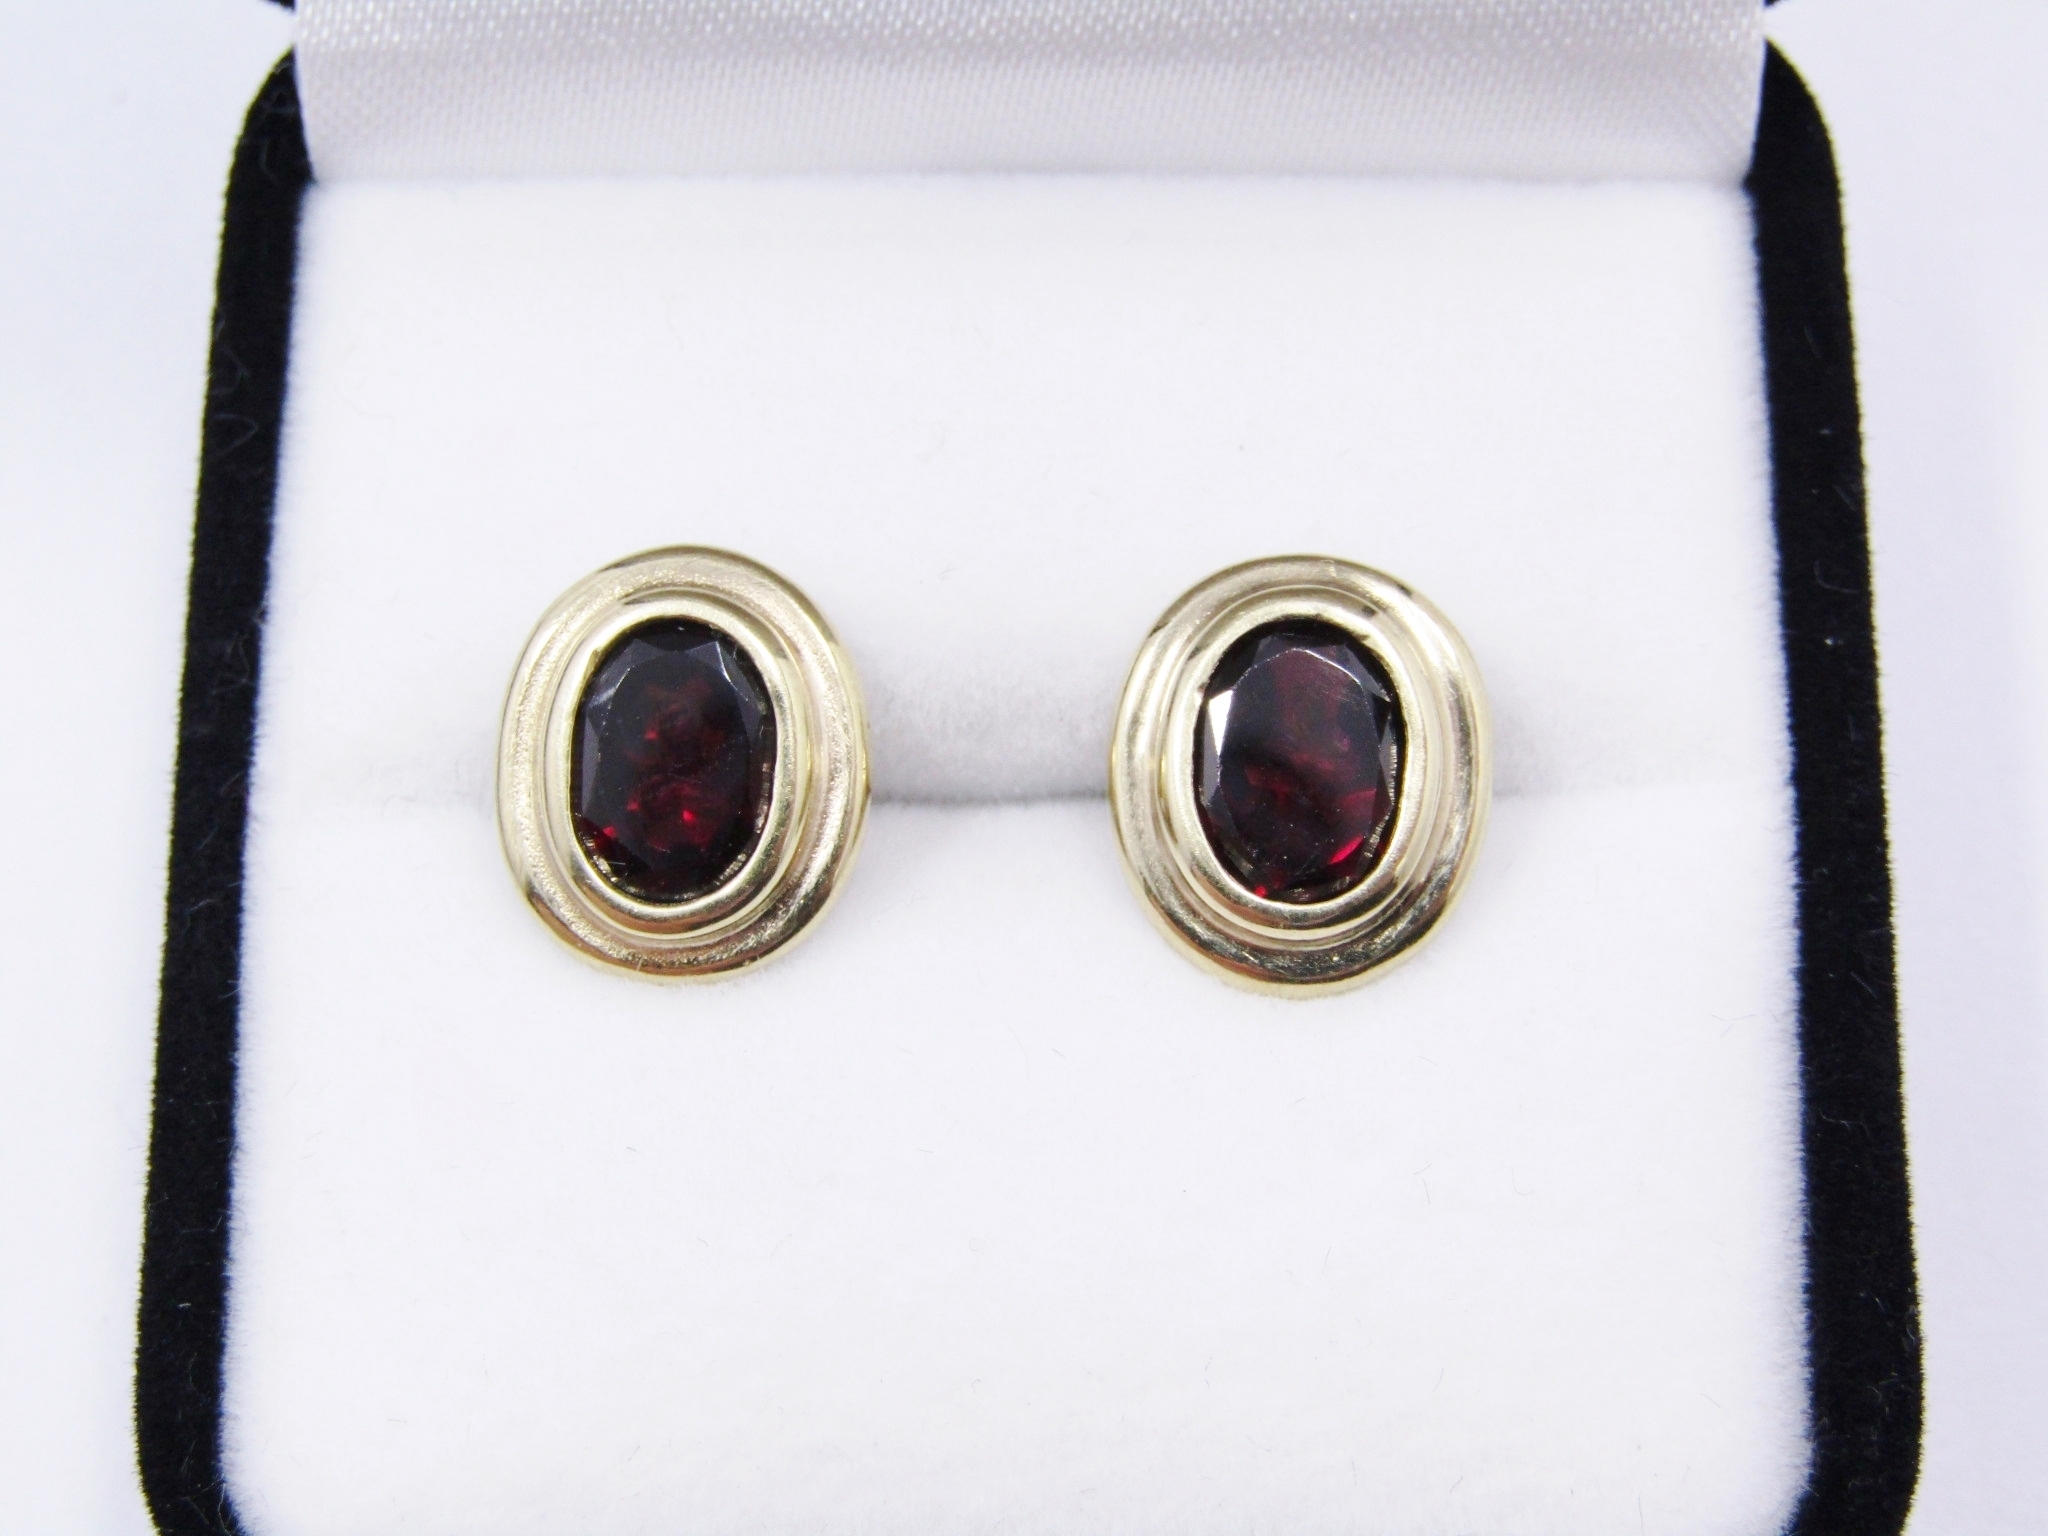 A Lovely Pair of 9CT Gold & Oval Garnet Earrings in 9ct Gold